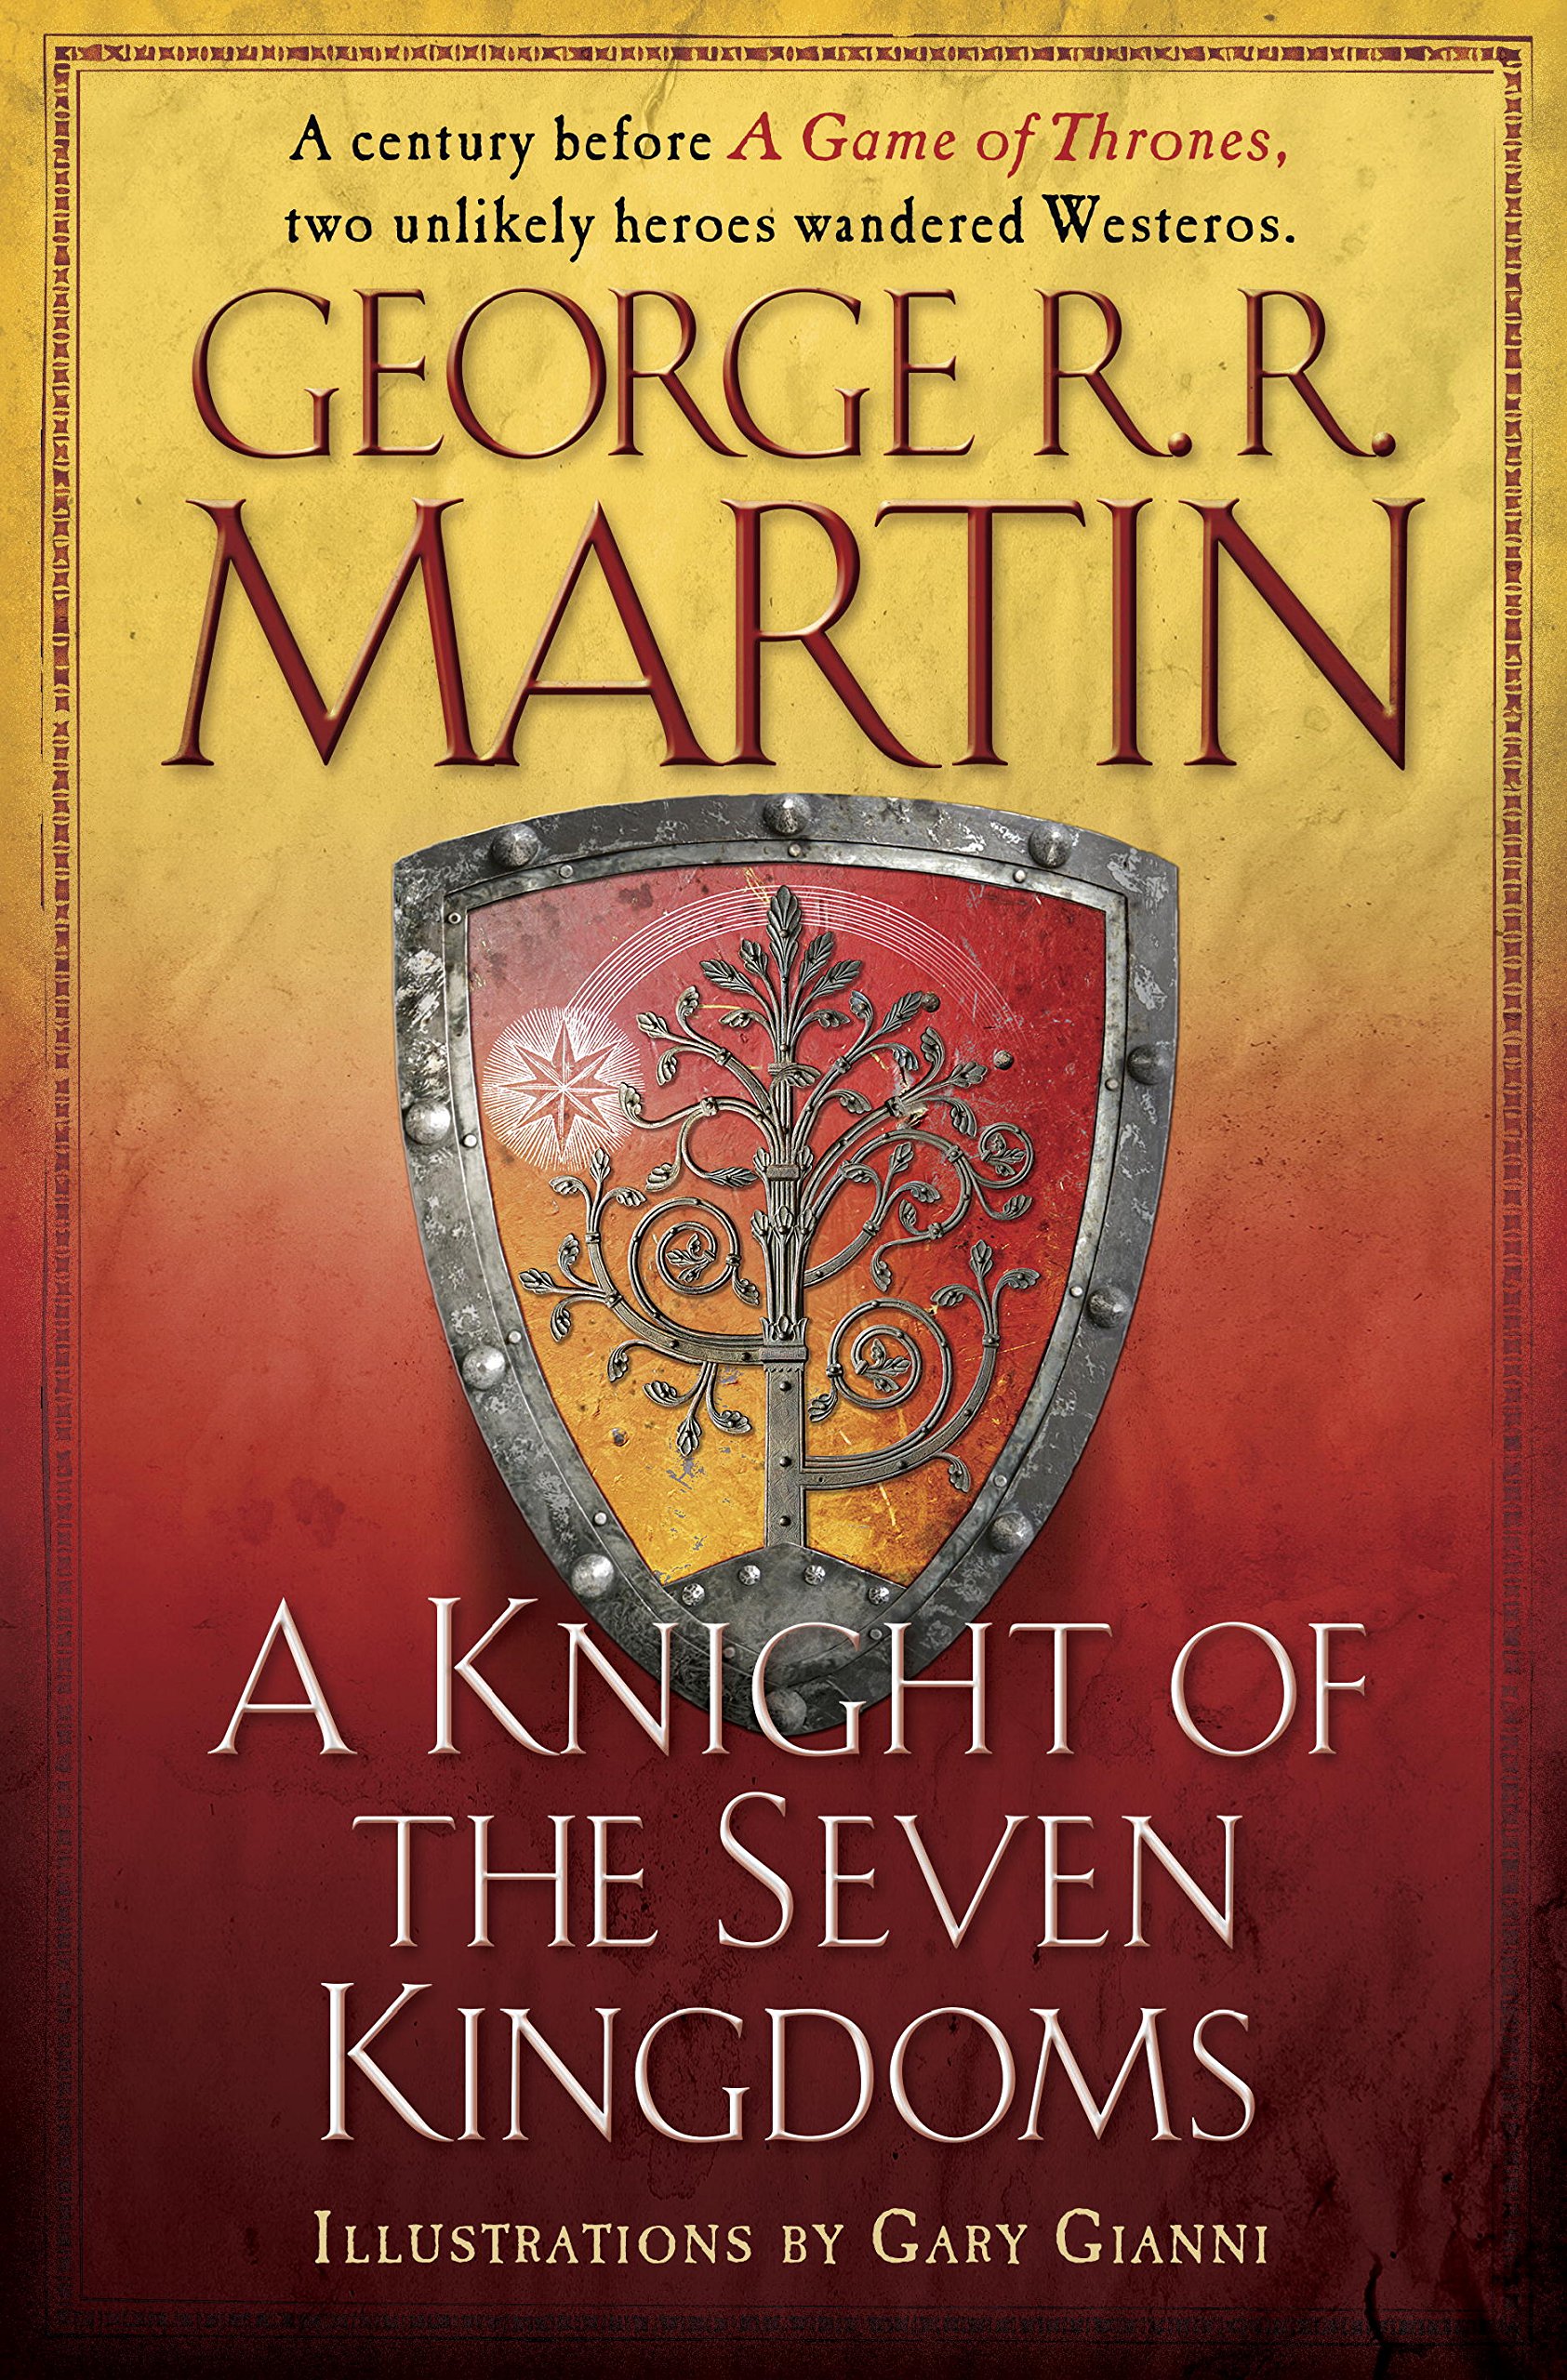 A Knight of the Seven Kingdoms (A Song of Ice and Fire) (eBook) by George R. R. Martin $2.99